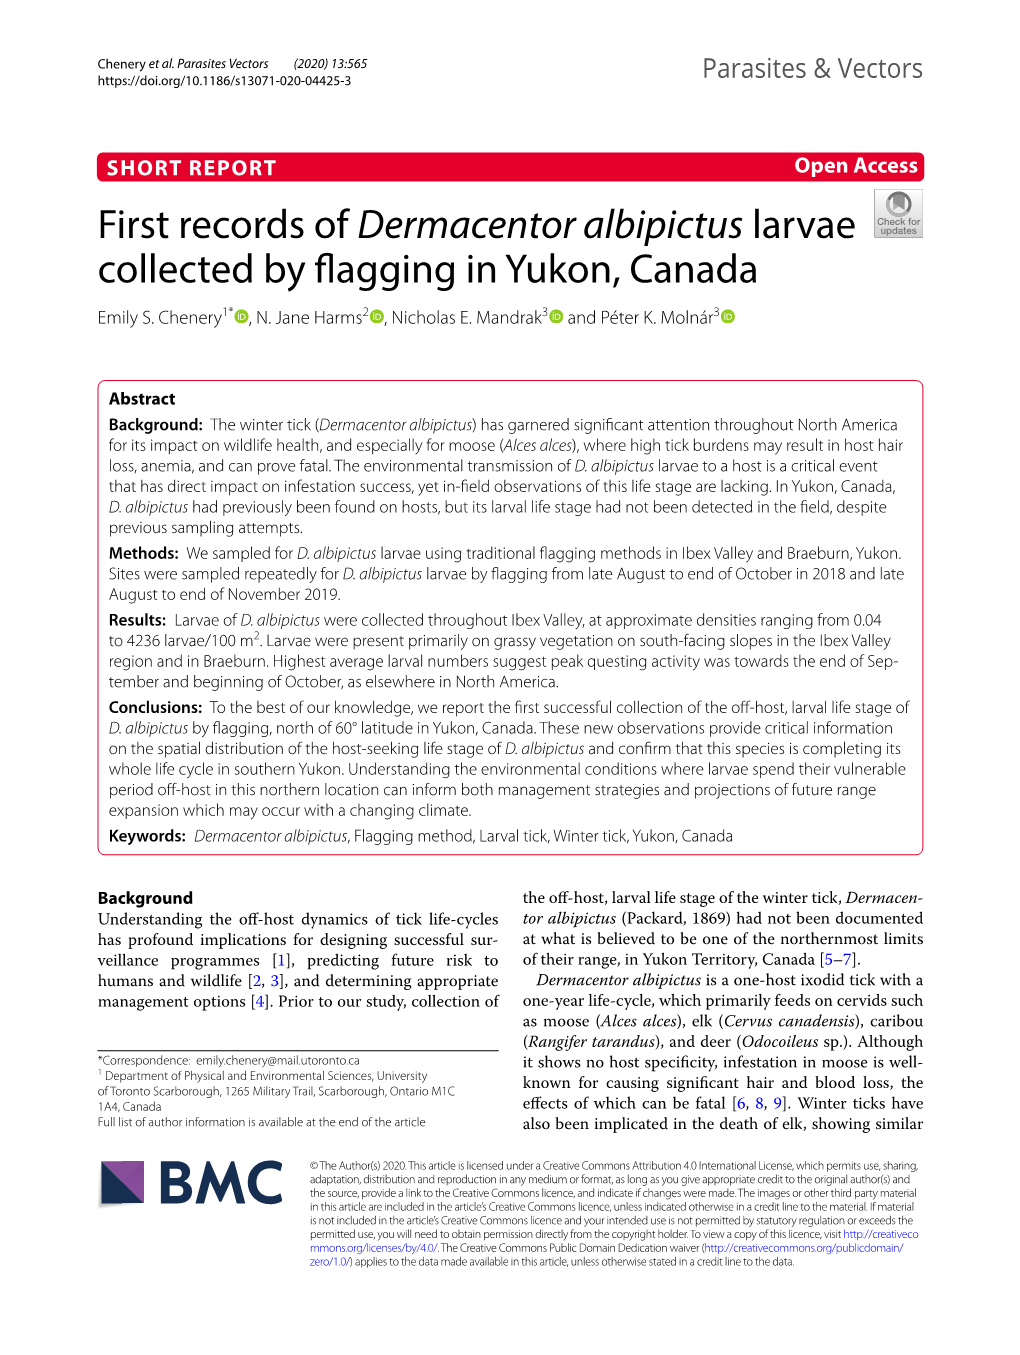 First Records of Dermacentor Albipictus Larvae Collected by Flagging in Yukon, Canada